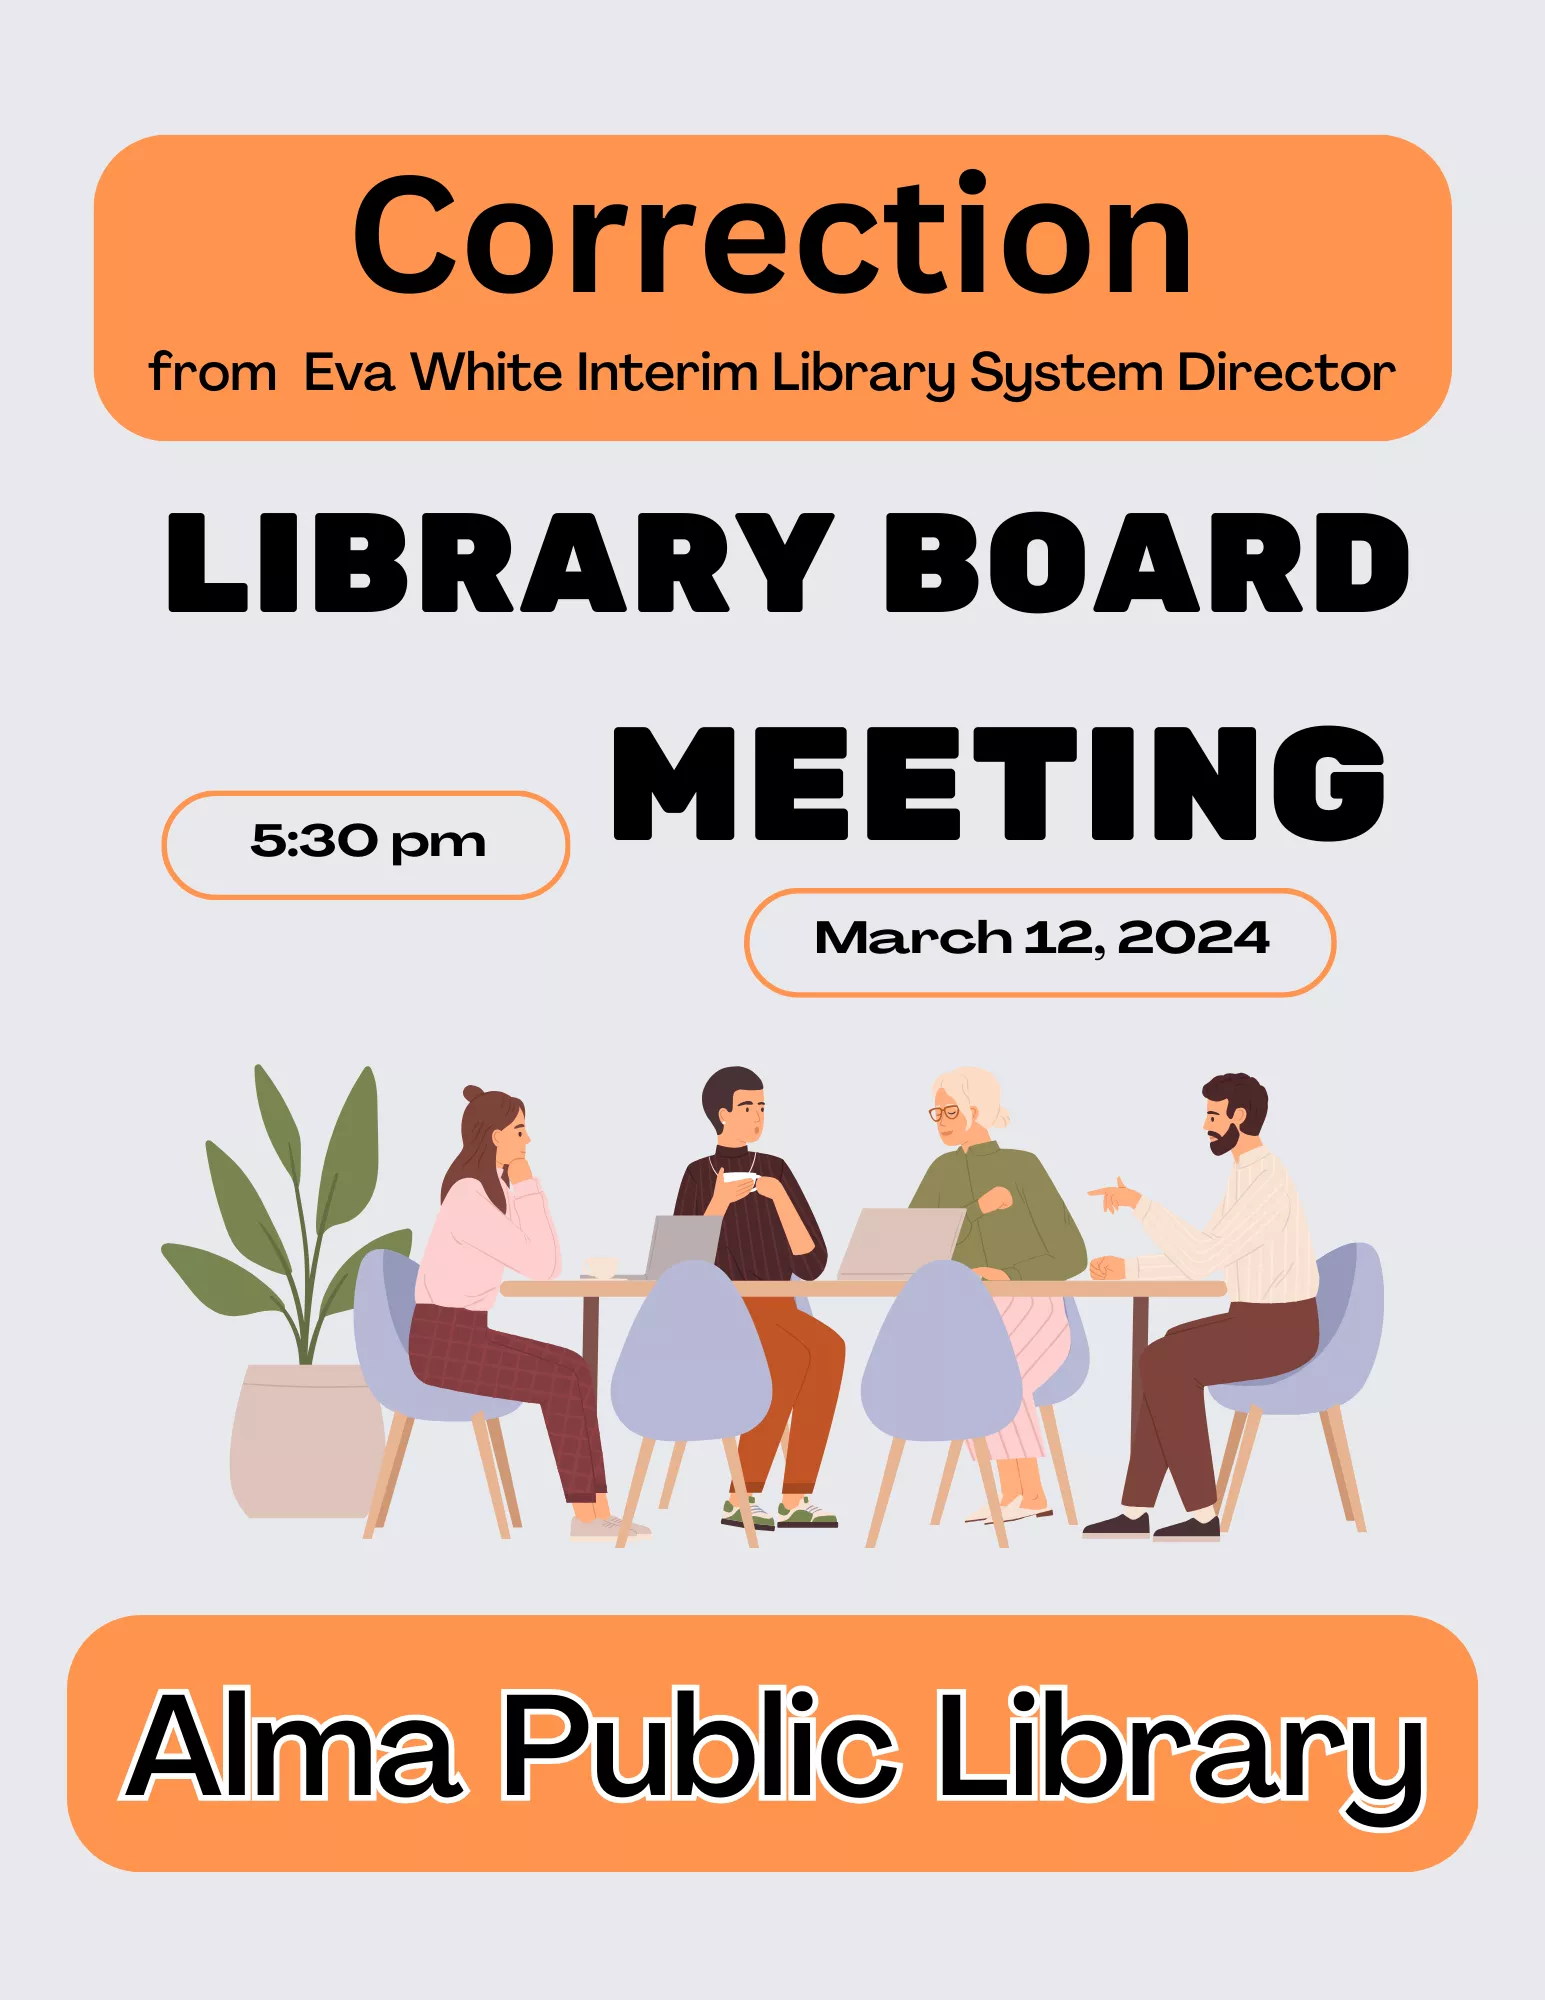 Correction Library Board meeting 5:30 pm March 12, 2024 at the Alma Public Library 